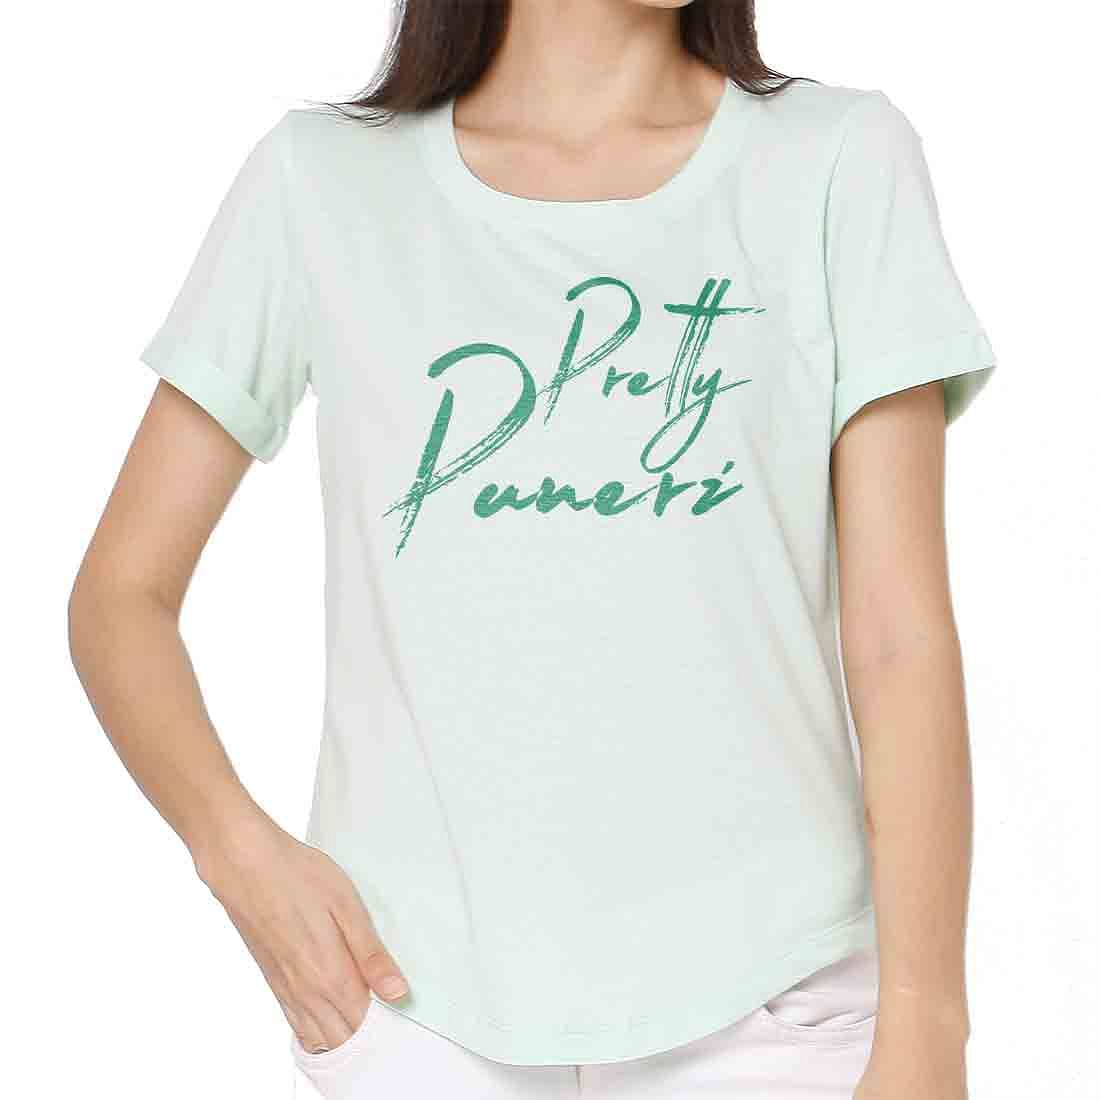 Workout T Shirts For Women - Pune Girl Nutcase